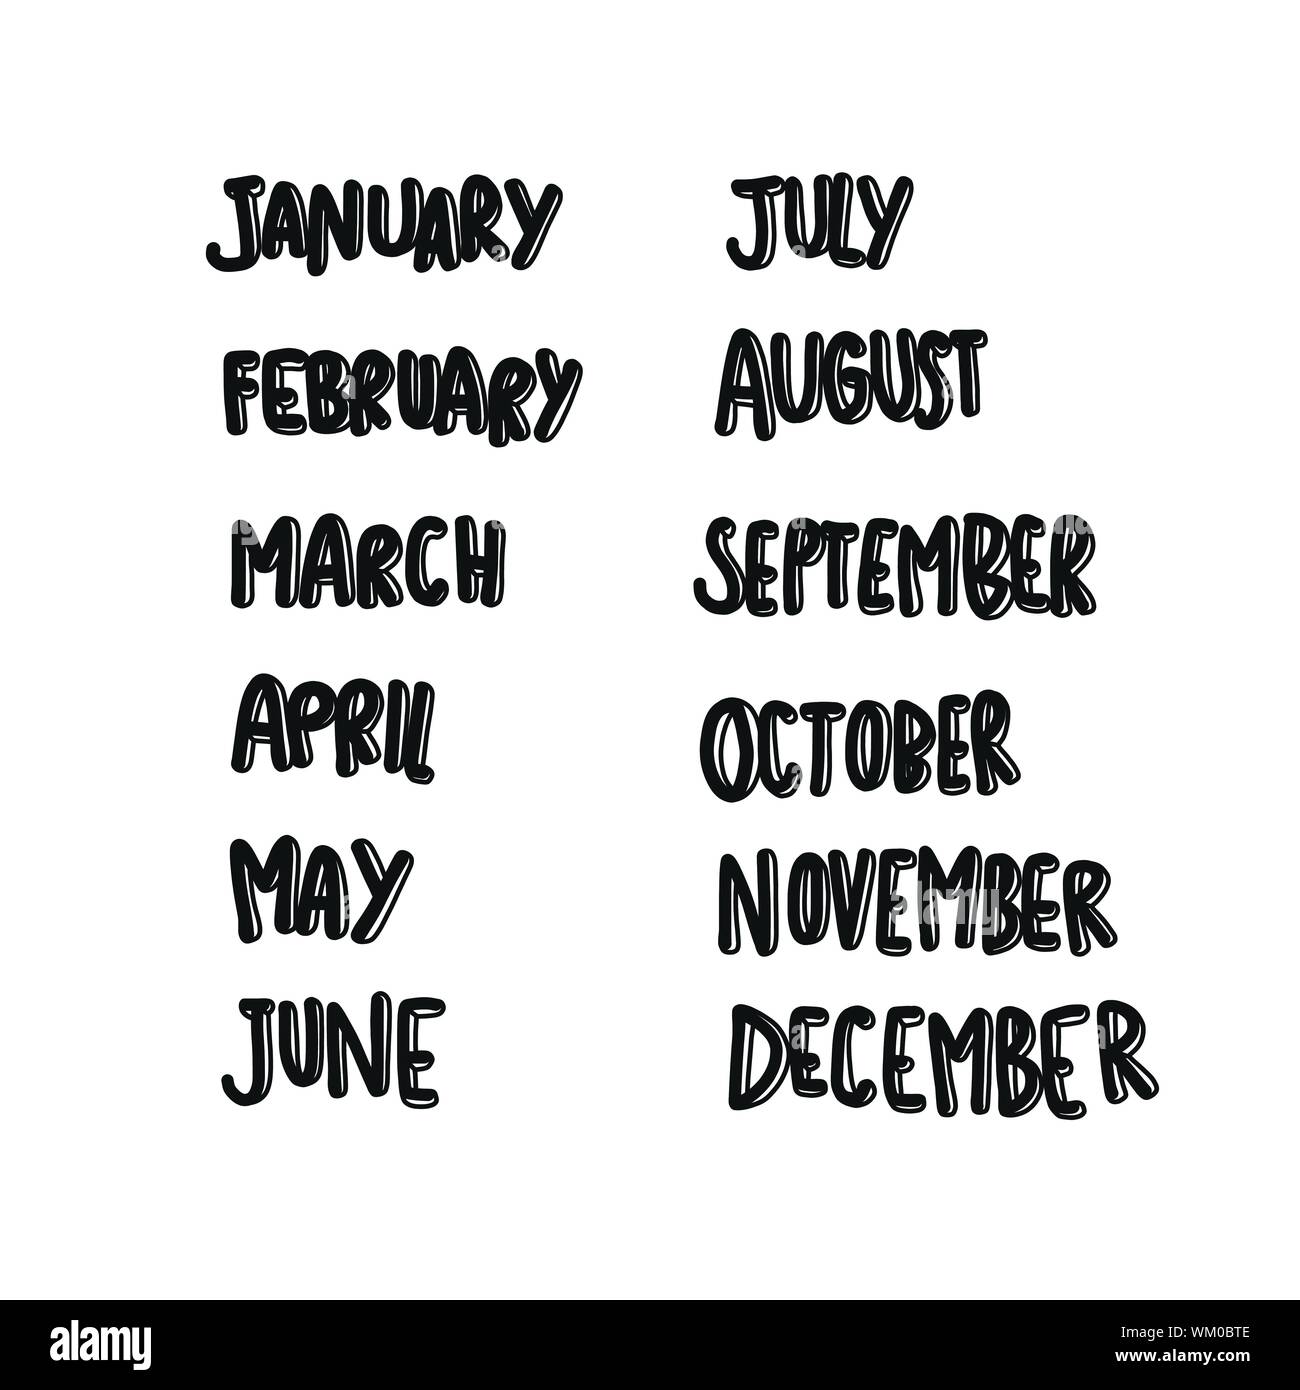 january-to-december-month-comic-style-lettering-vector-illustration